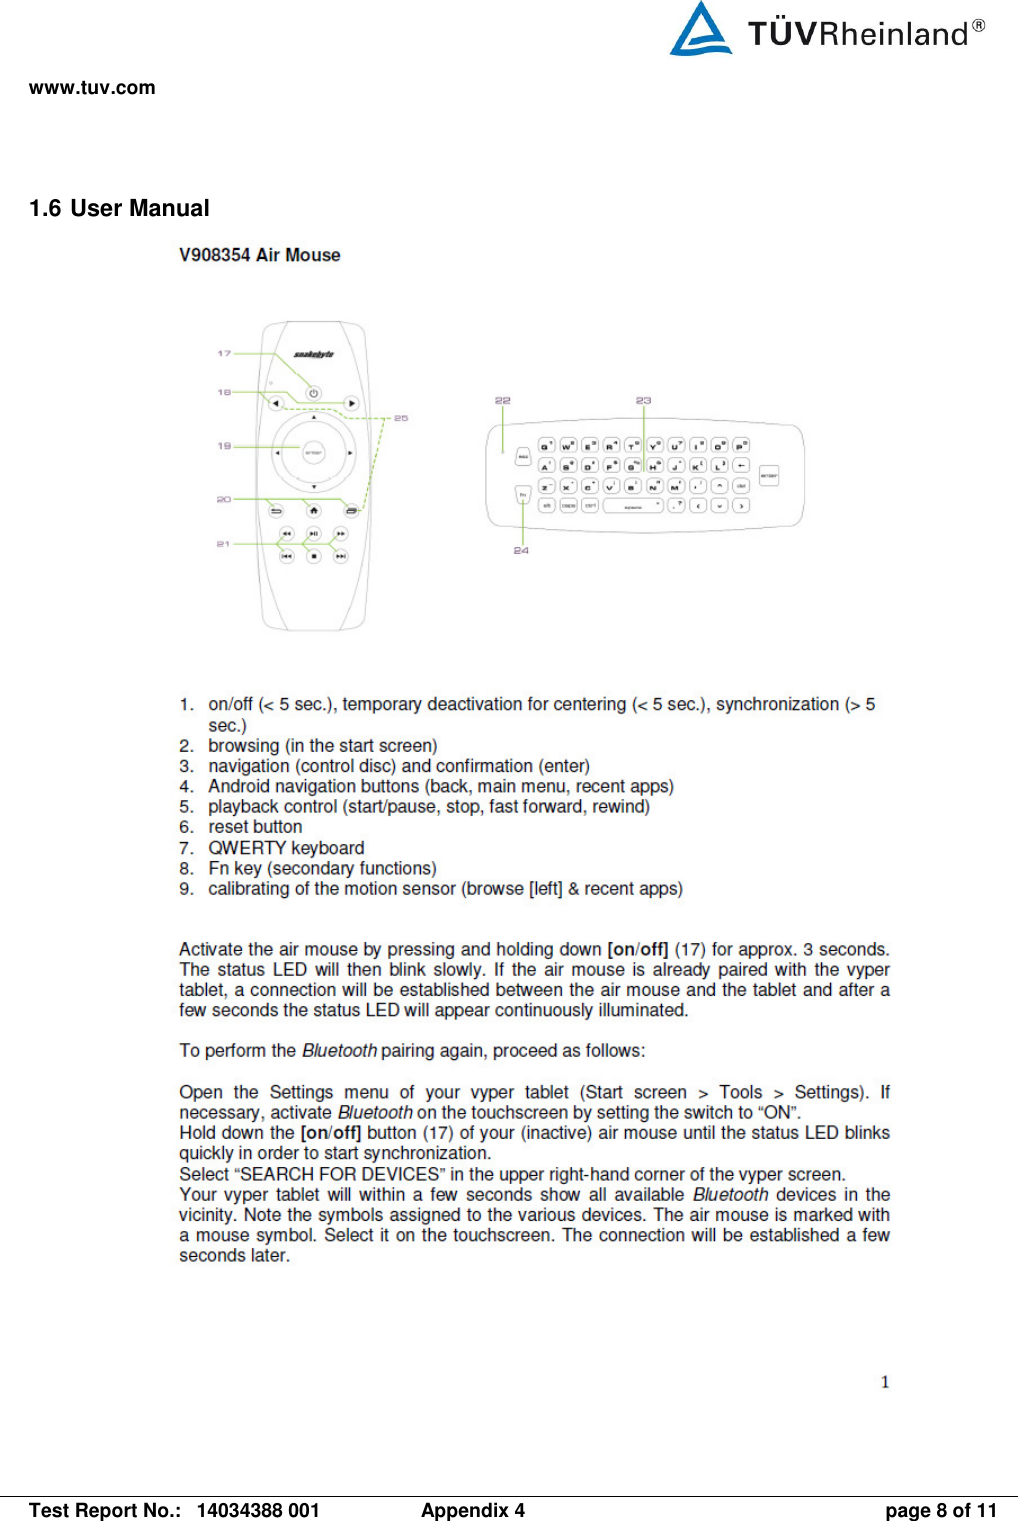 www.tuv.com   Test Report No.:  14034388 001  Appendix 4  page 8 of 11 1.6 User Manual   